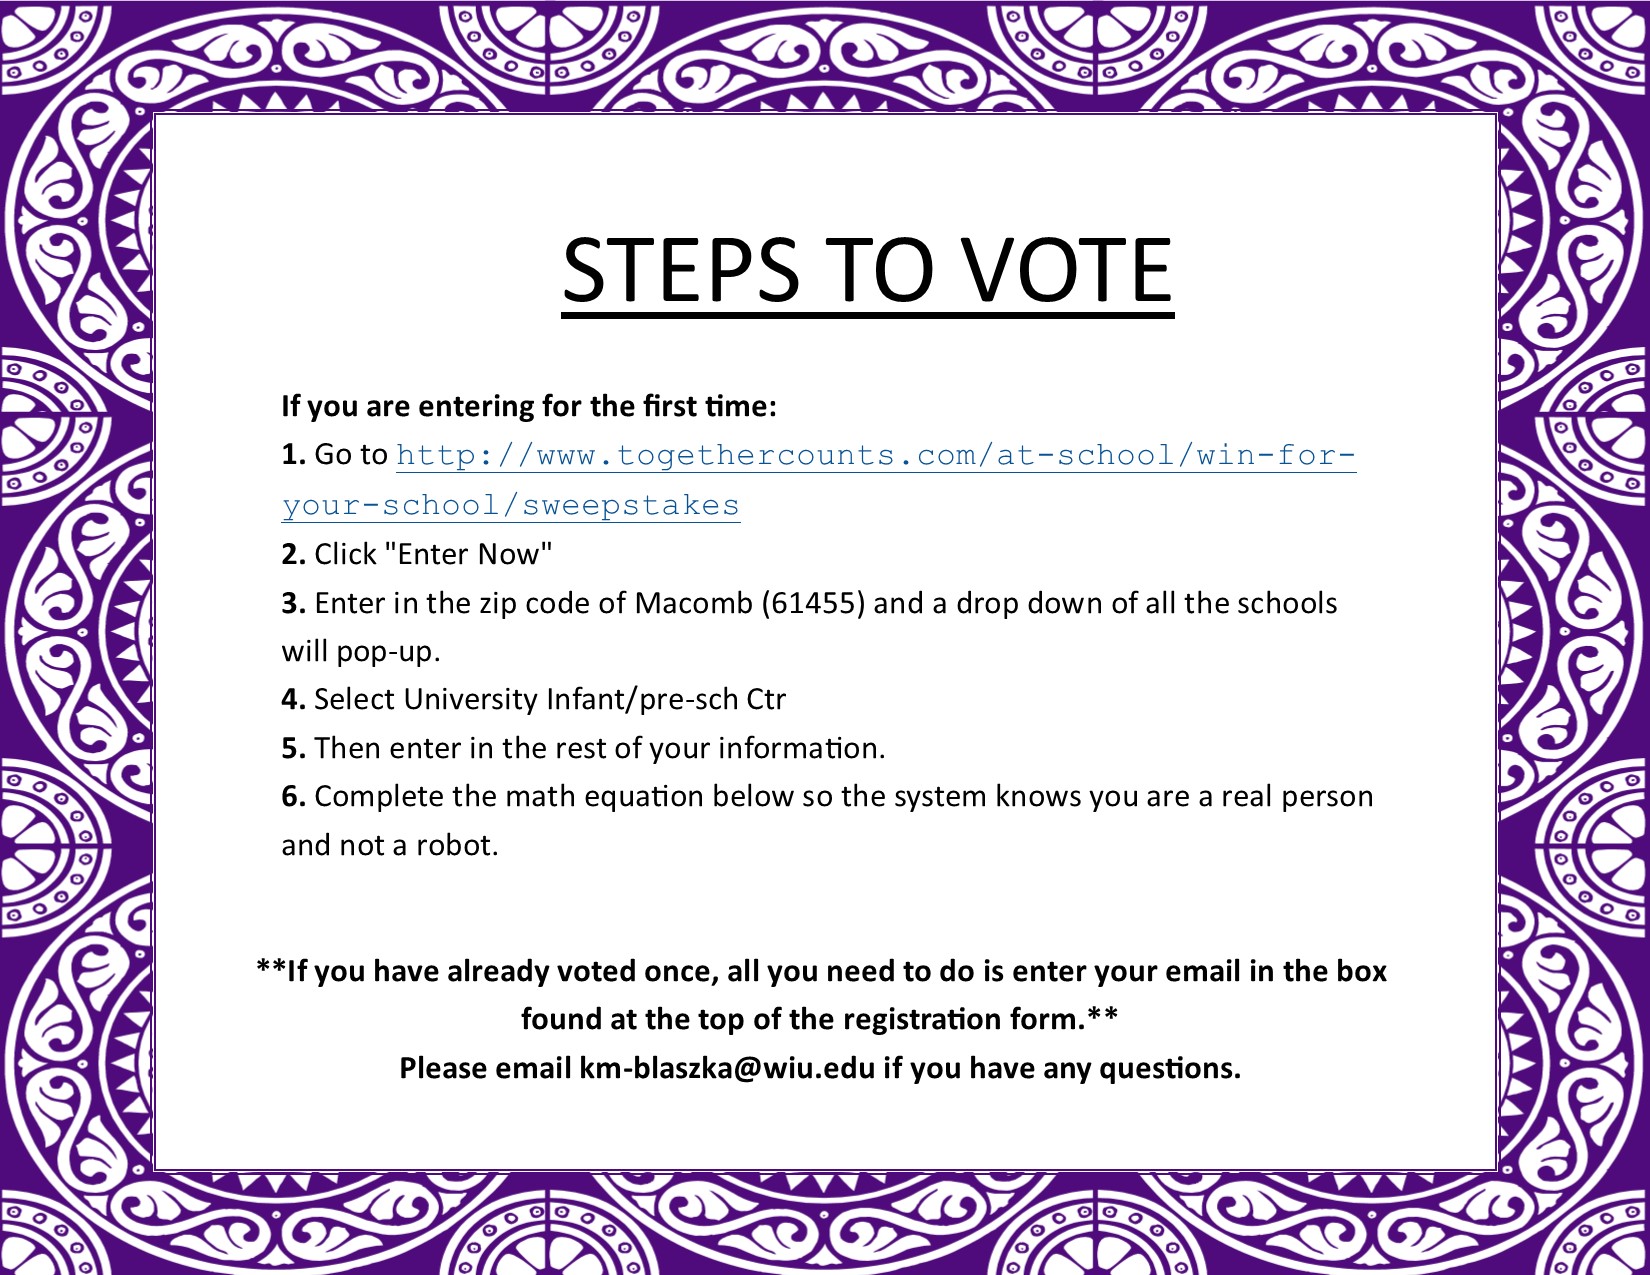 picture of the steps to vote